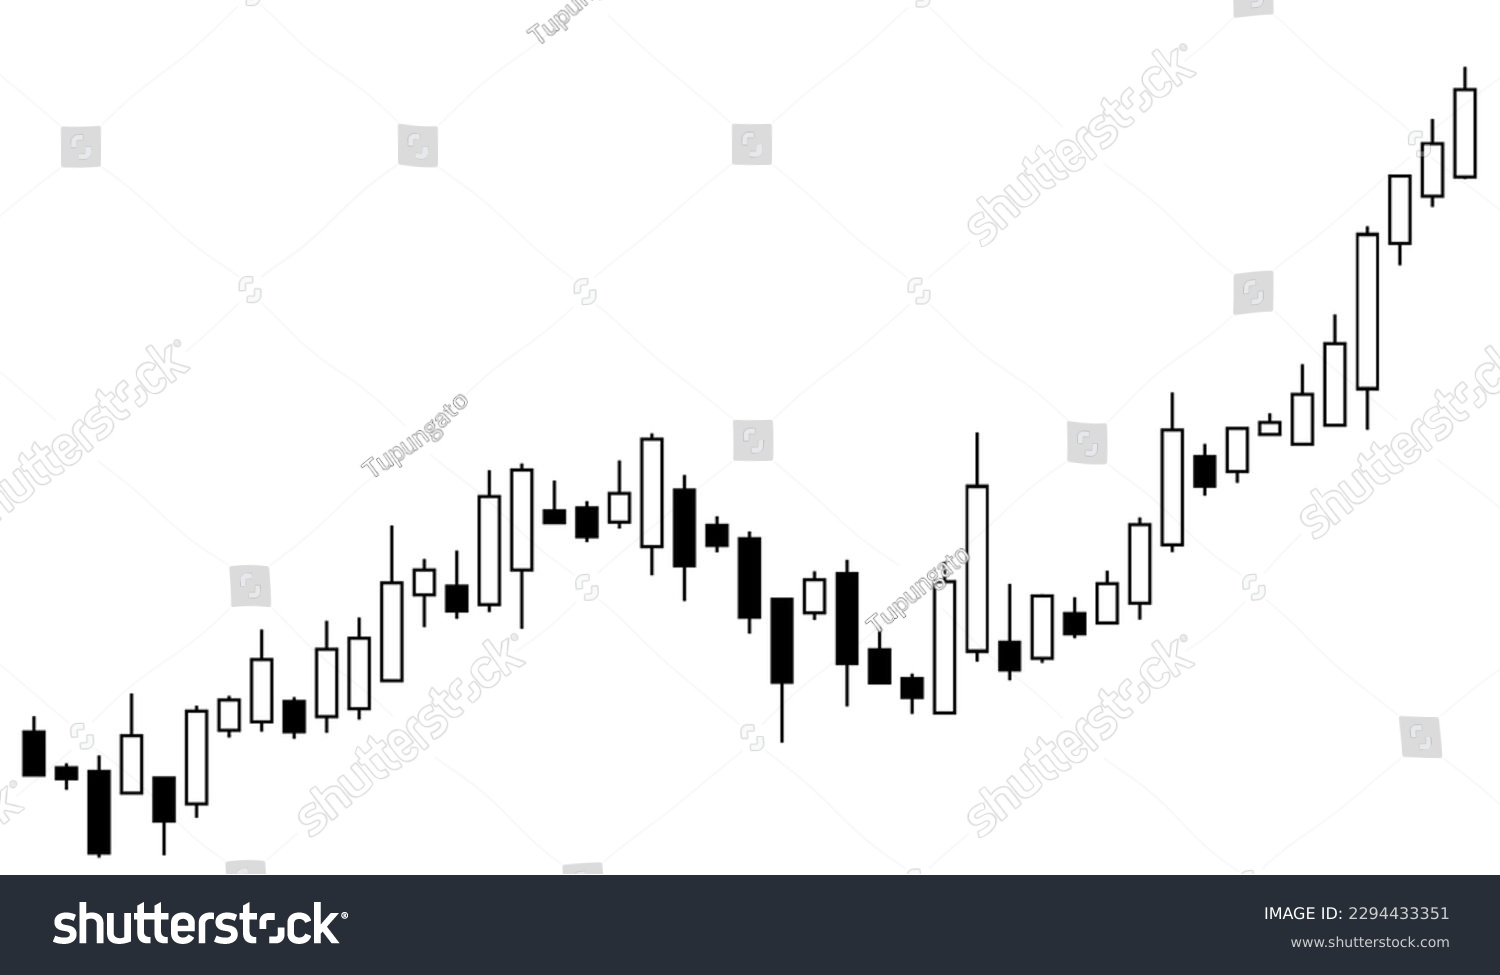 SVG of Stock market candle stick chart. Useful also for forex trading and crypto trade graphs. Uptrend - bullish trend with market going up. svg